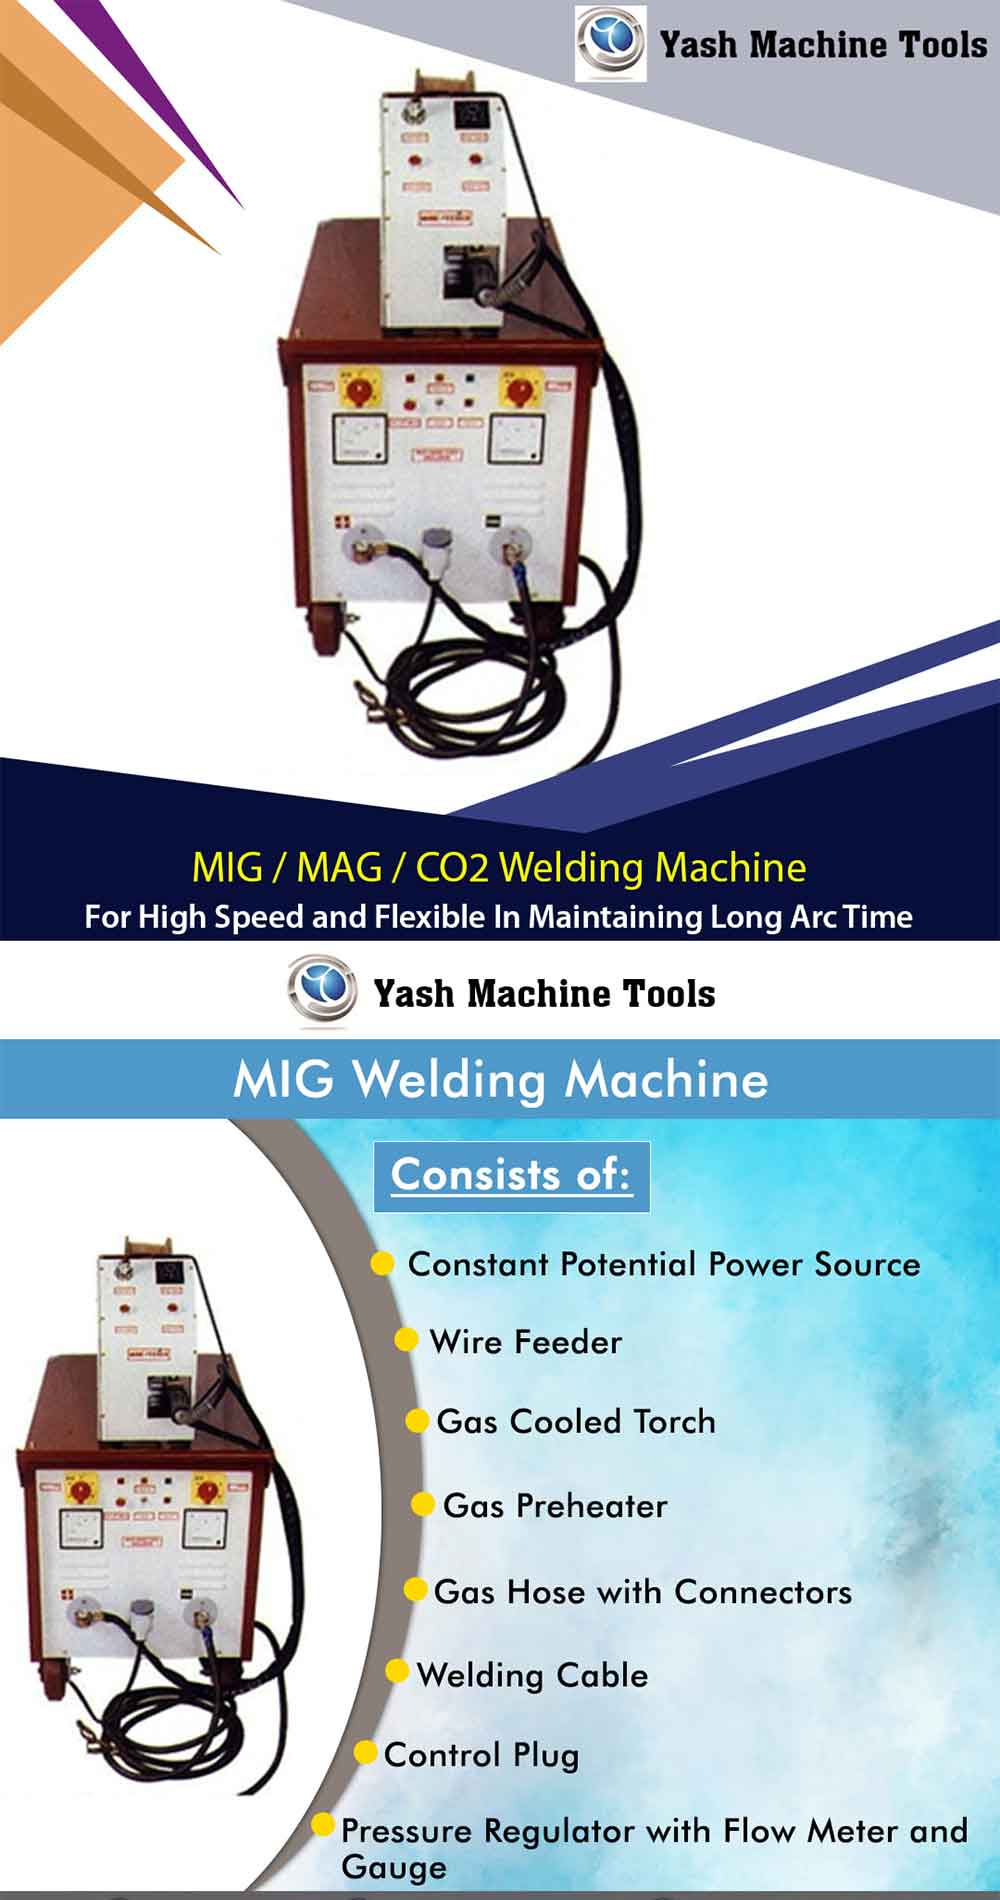 MIG Welding Machine a tool used for fusion welding